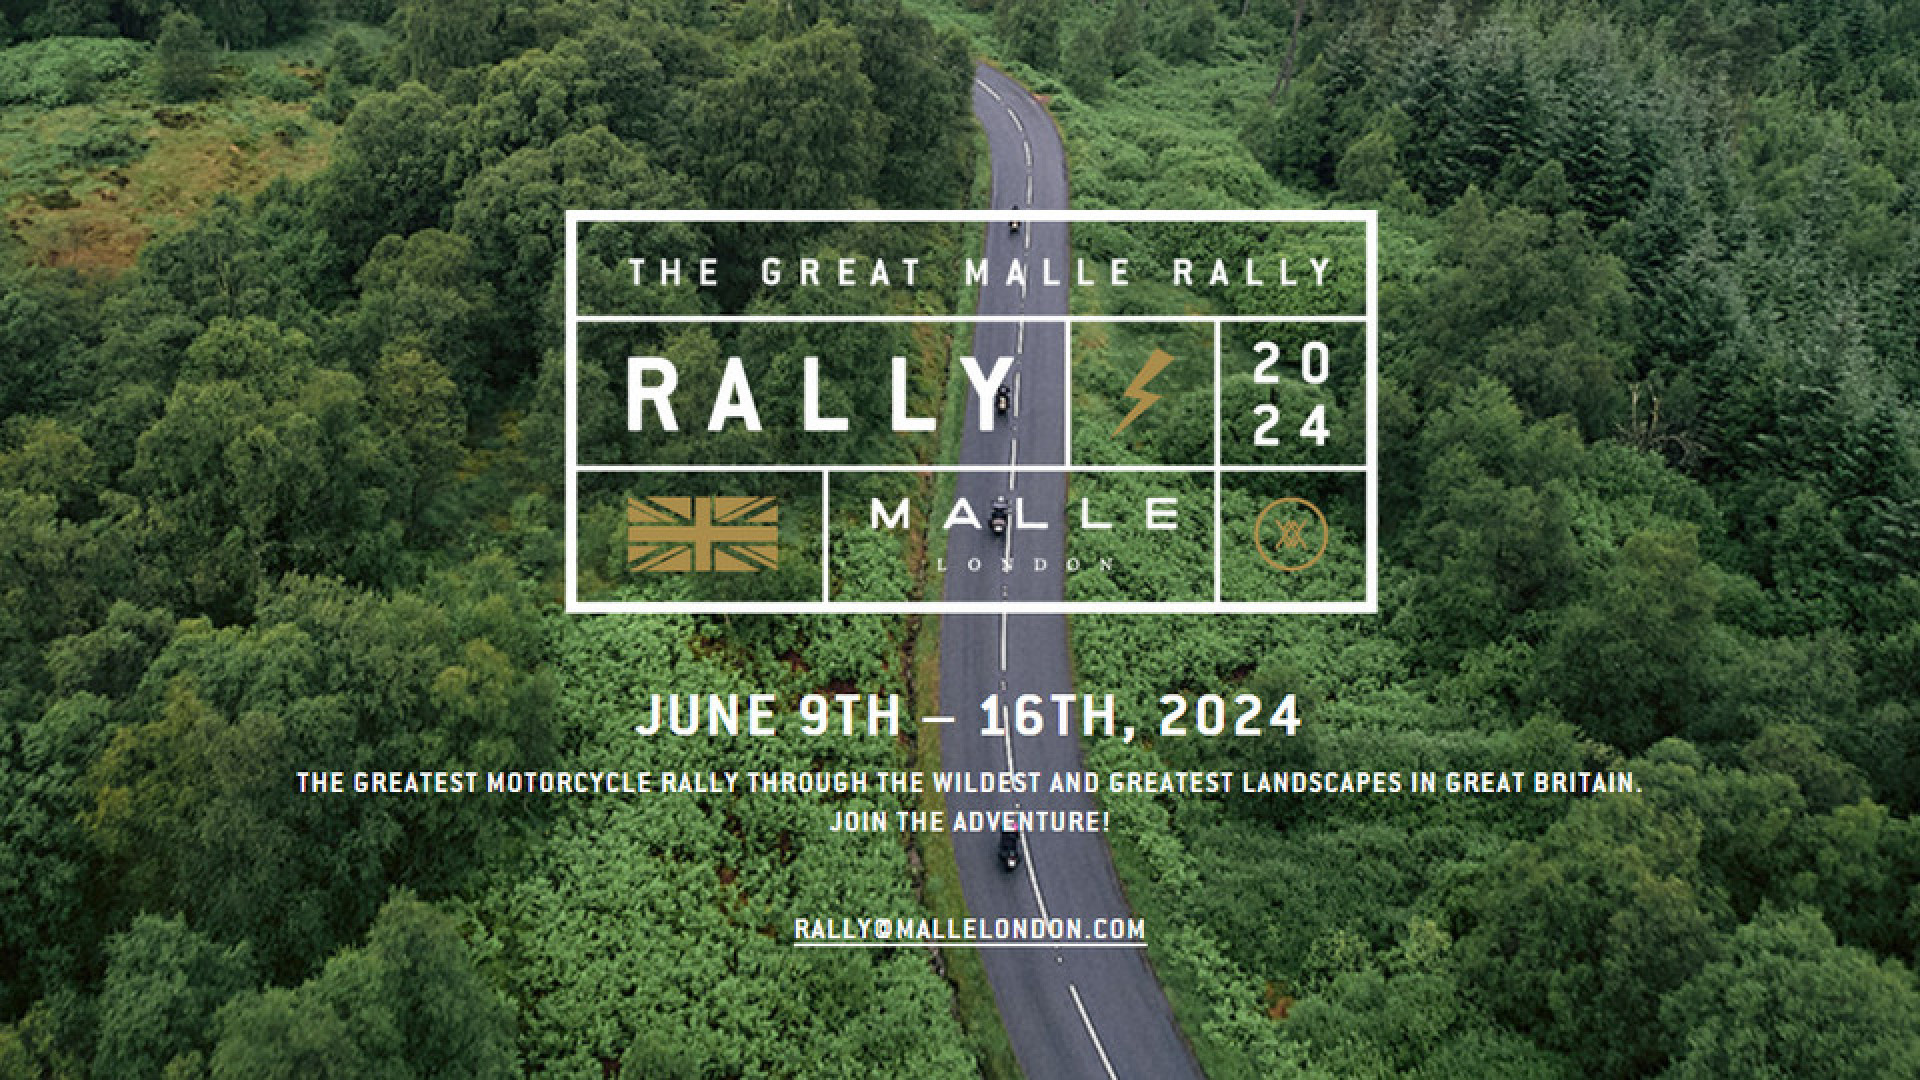 https://www.raceleathers.co.uk/image/cache/catalog/Blog%20Images/The%20Great%20Malle%20Rally%202024-1920x1080.jpg